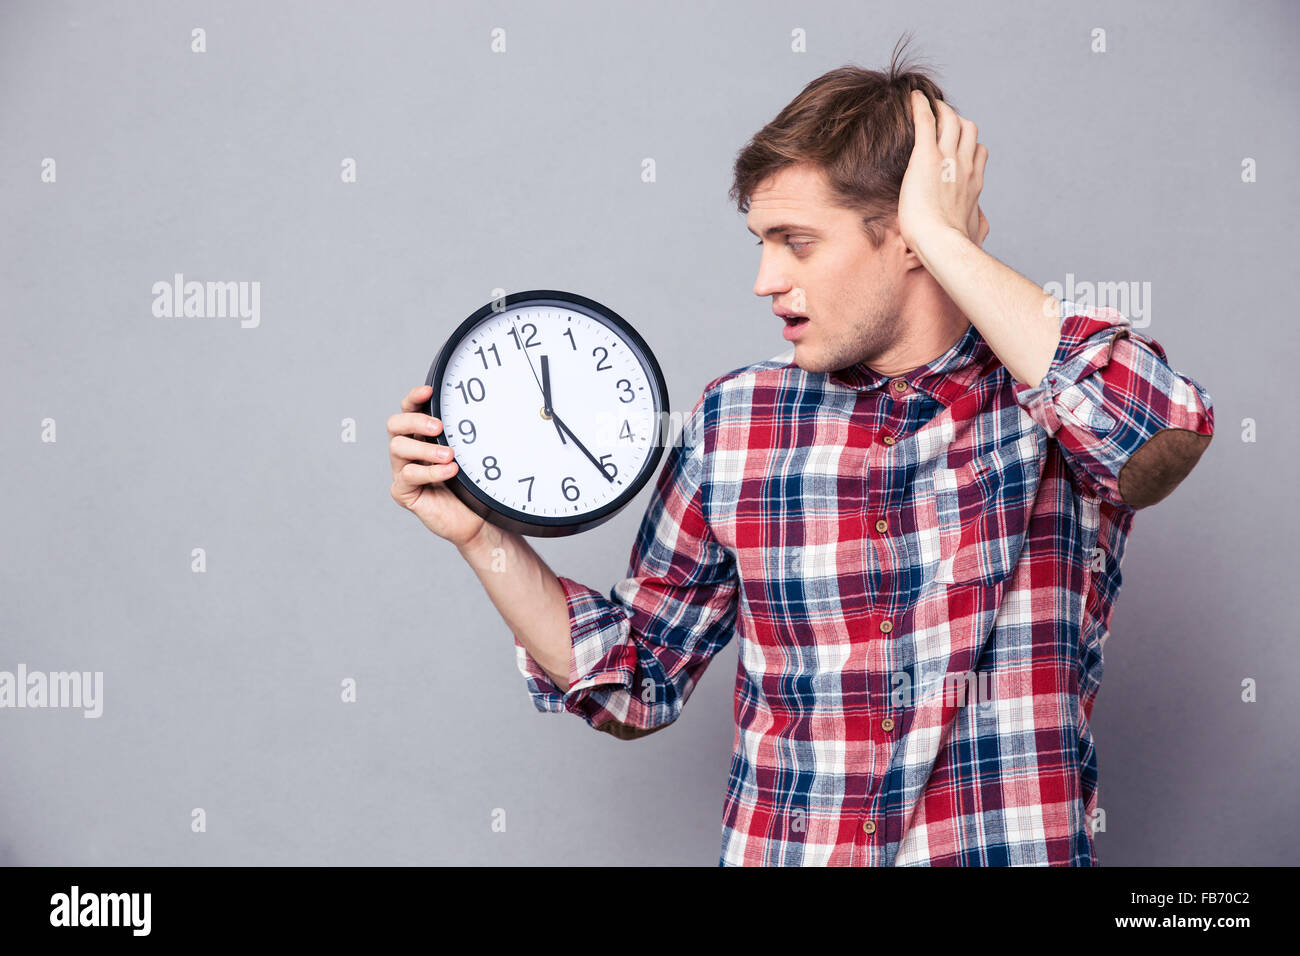 Worried amazed young man in checkered shirt holding and looking at clock over grey background Stock Photo